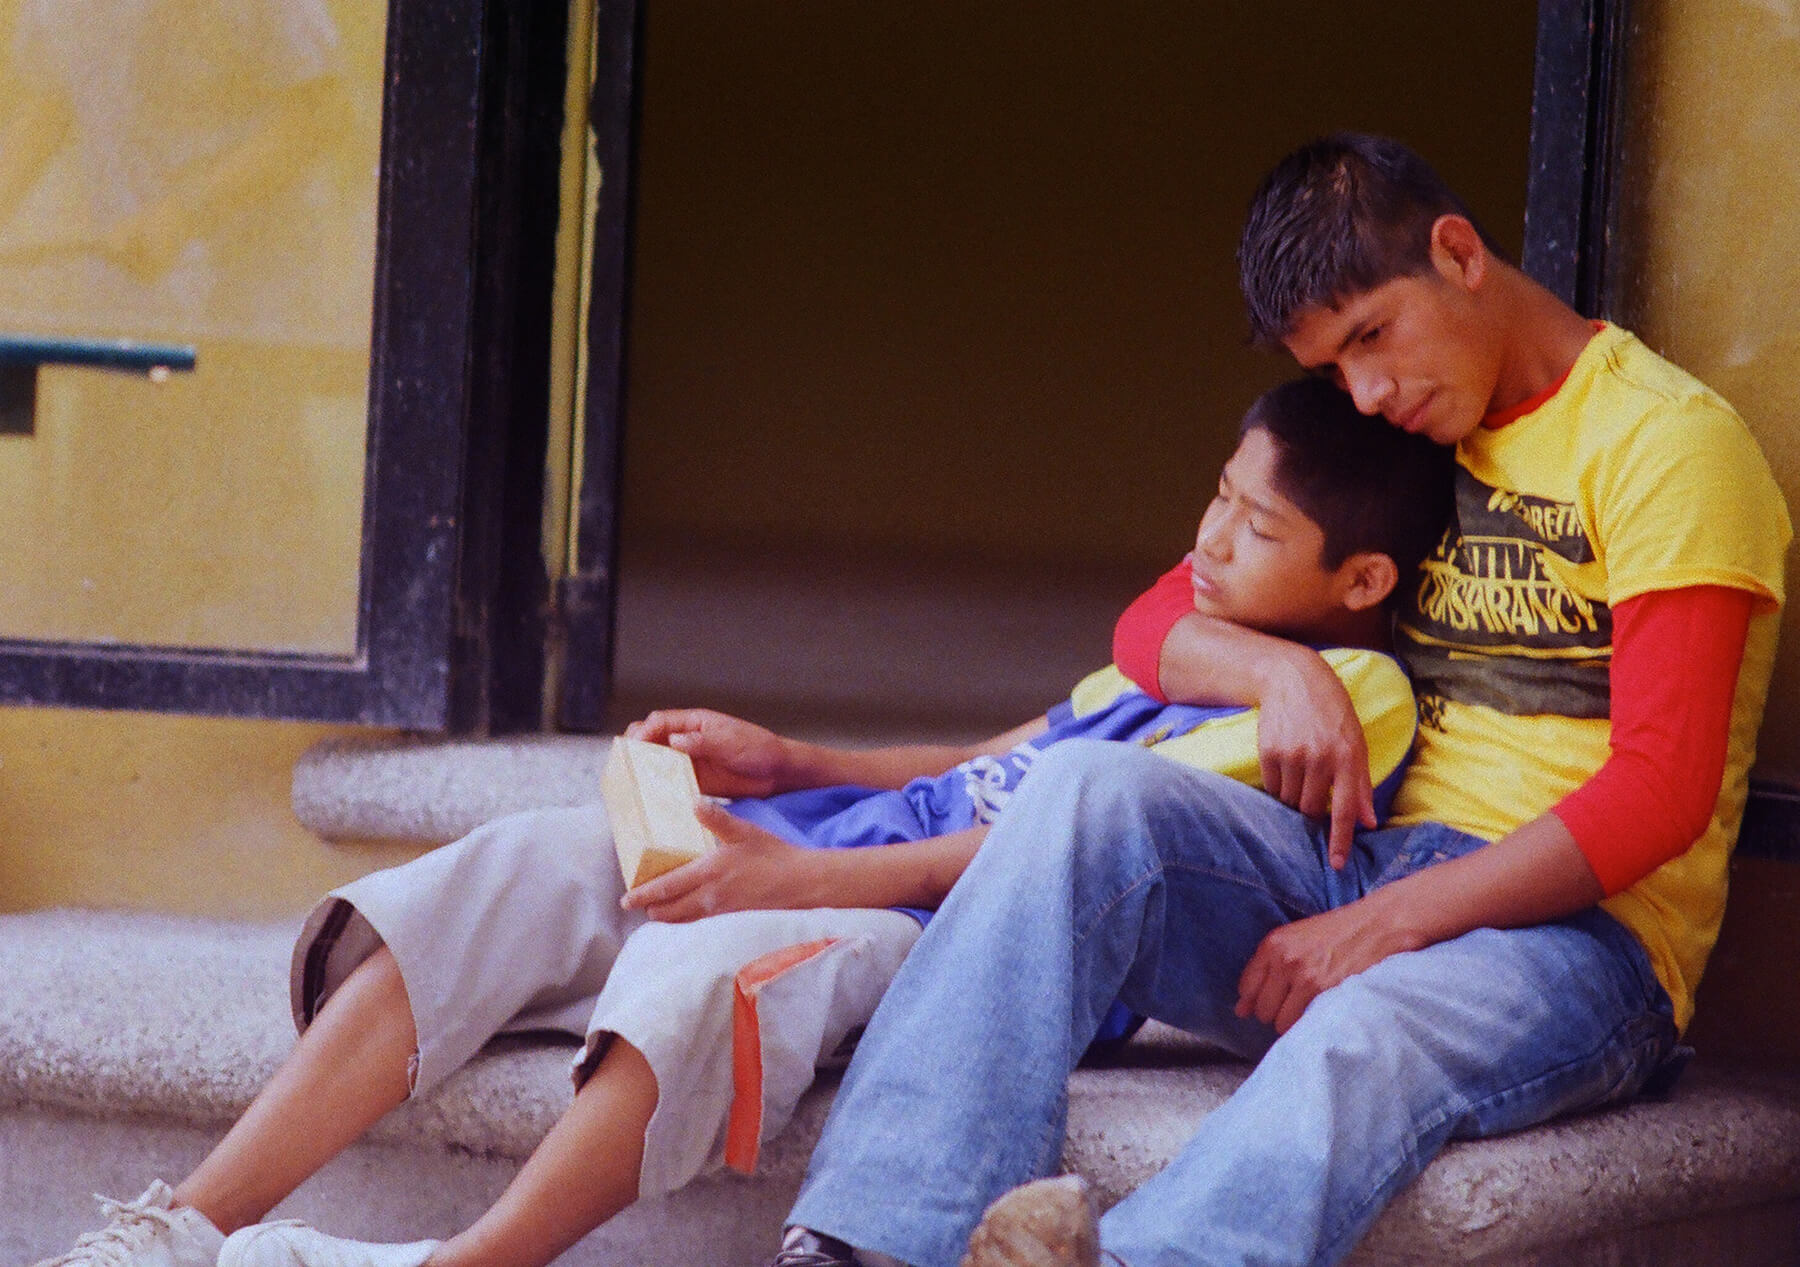 Still from Visitor's Day. A young man sits with a young boy on the ground outside, leaning on each other. The older one with an arm around the young boy.